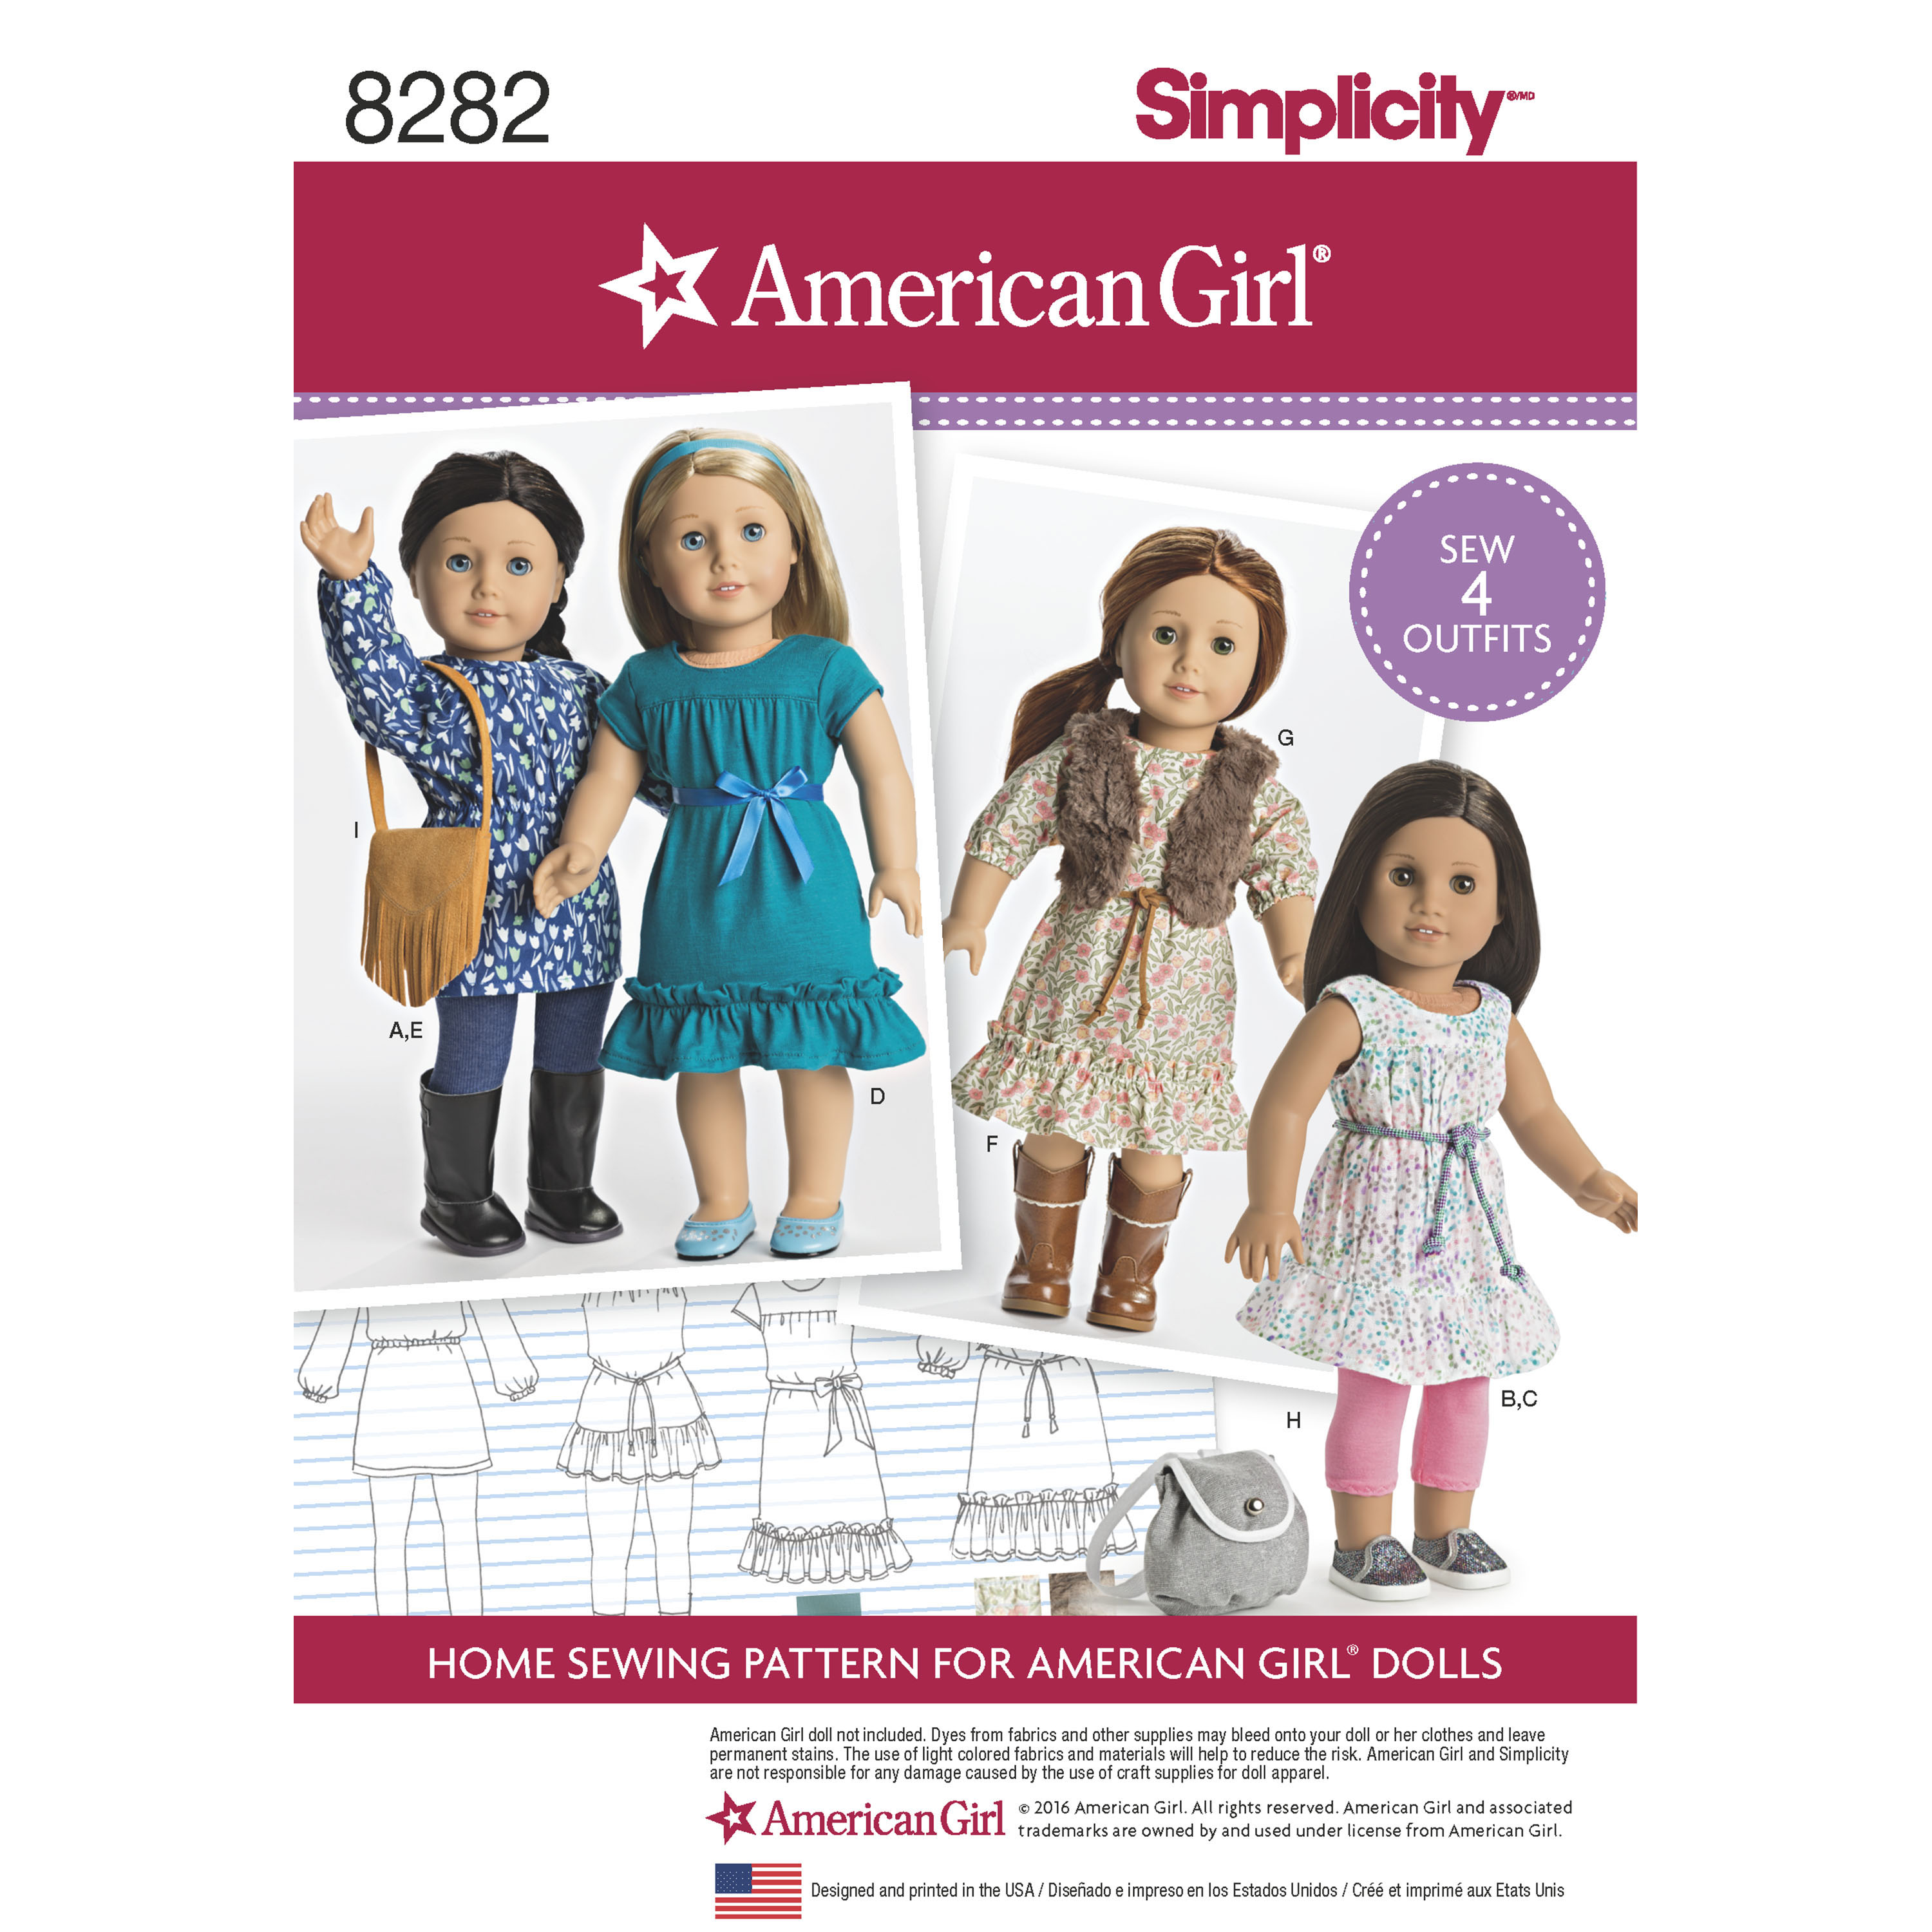 Simplicity Simplicity Pattern 8282 American Girl 18 Doll Clothes